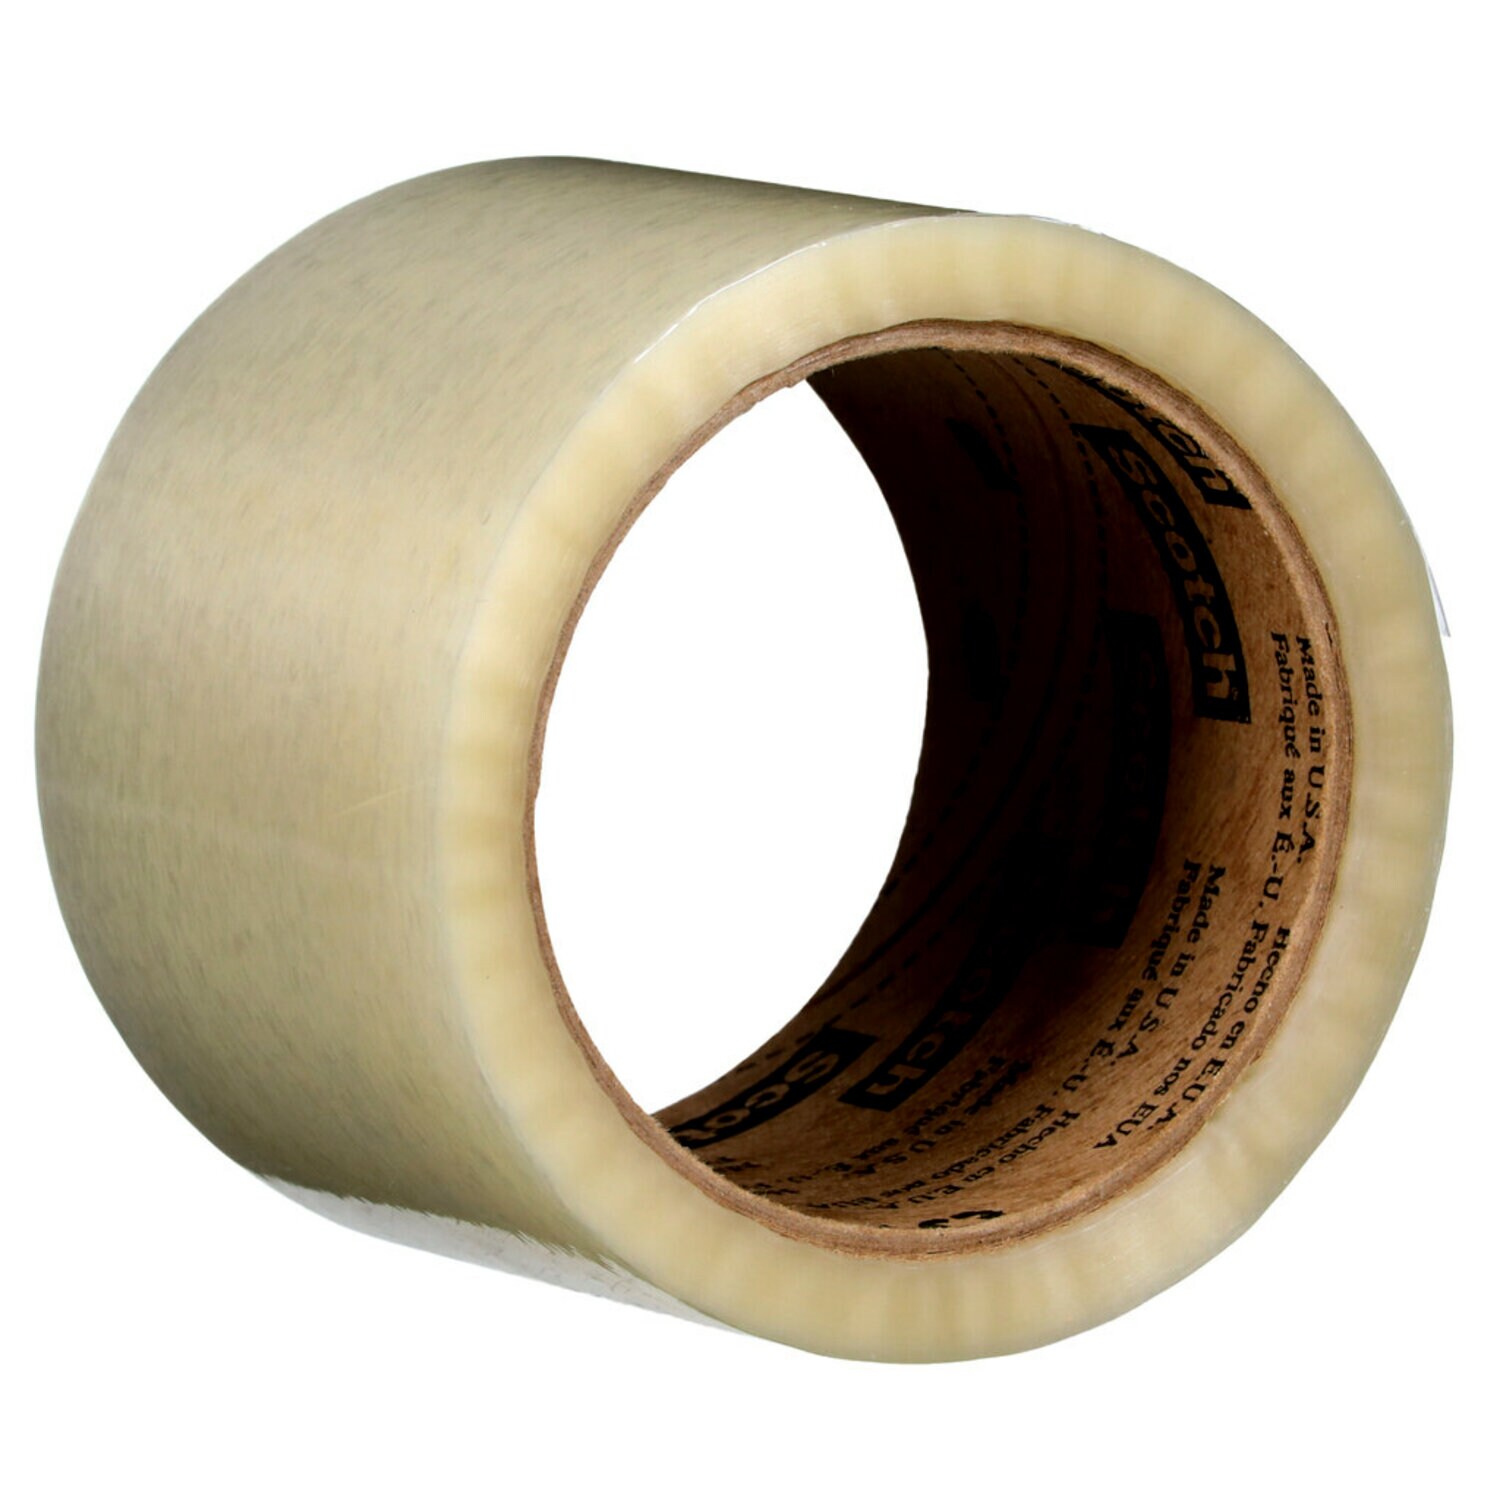 7010374972 - Scotch Box Sealing Tape 371, Clear, 72 mm x 50 m, 24 per case (6
rolls/pack 4 packs/case), Conveniently Packaged